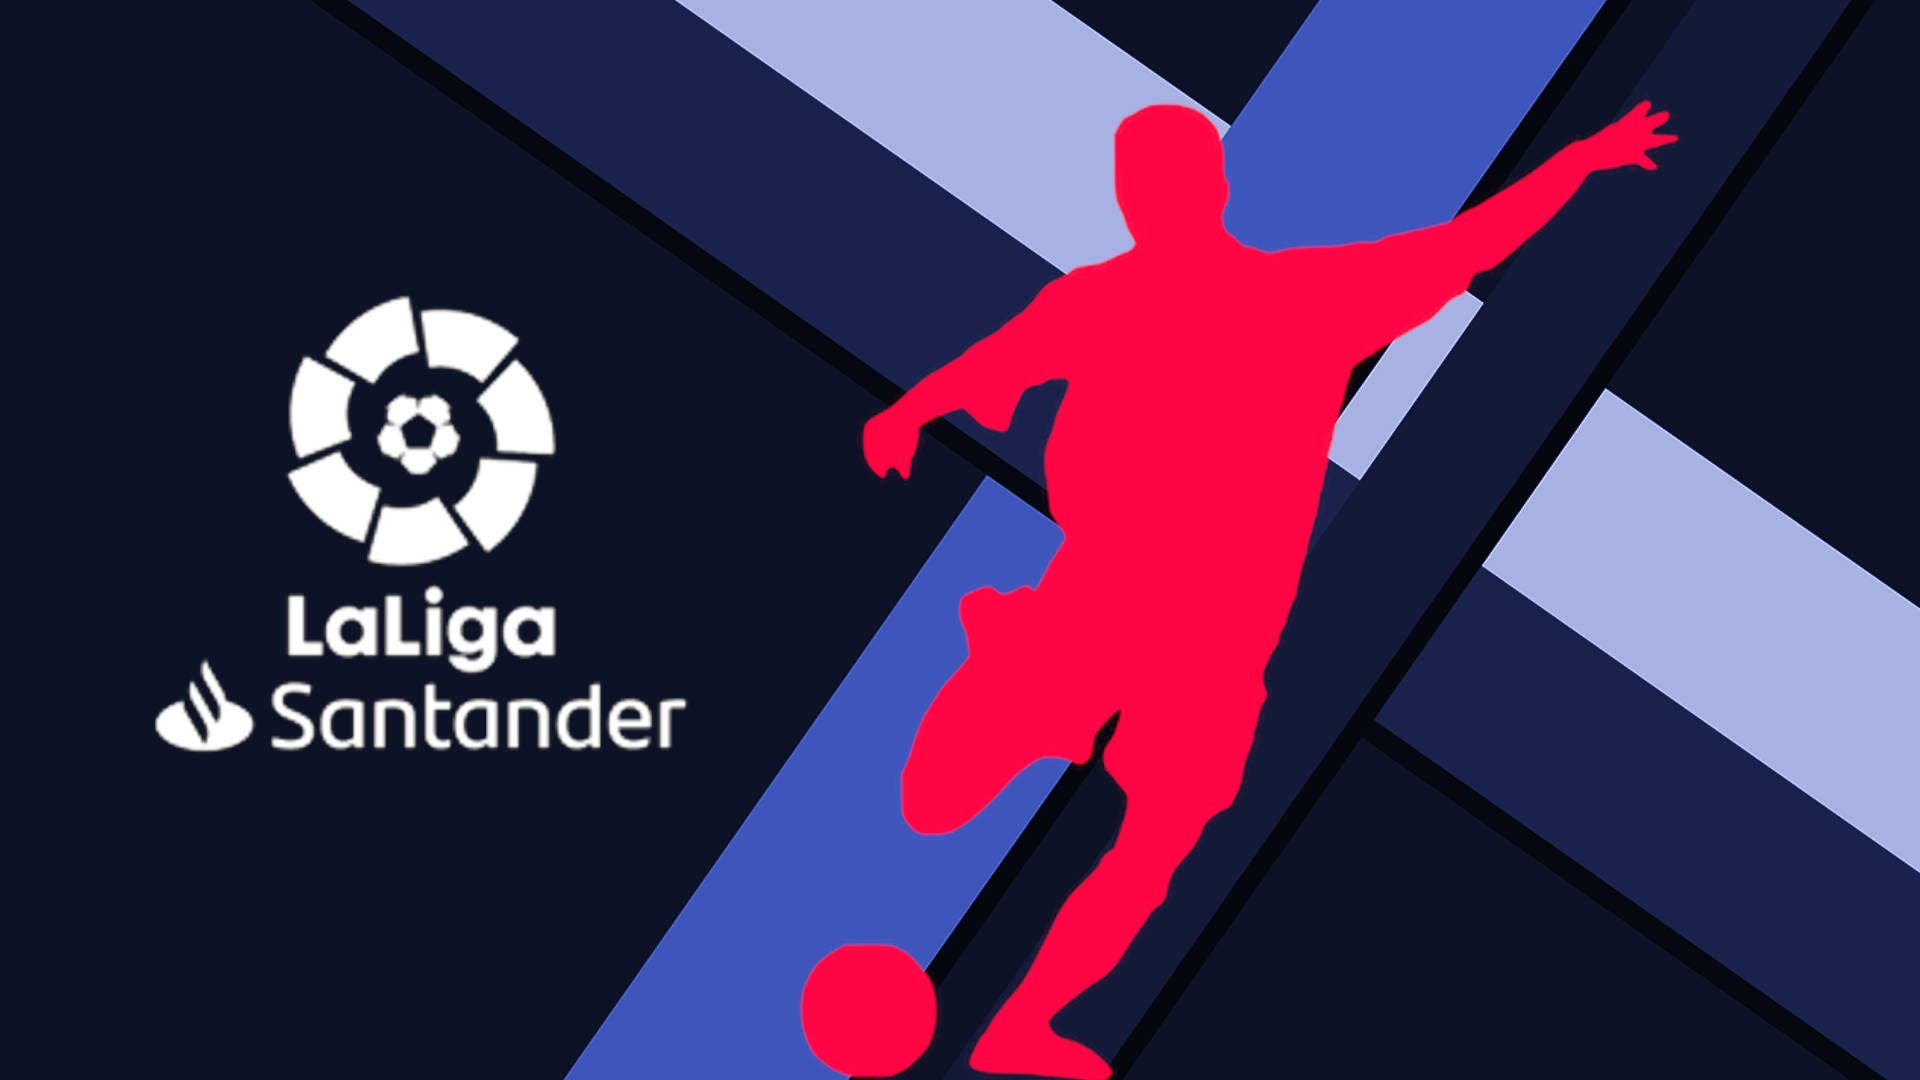 FIFA 23: It may have gone unnoticed, but this cheap LaLiga Santander striker performs very well